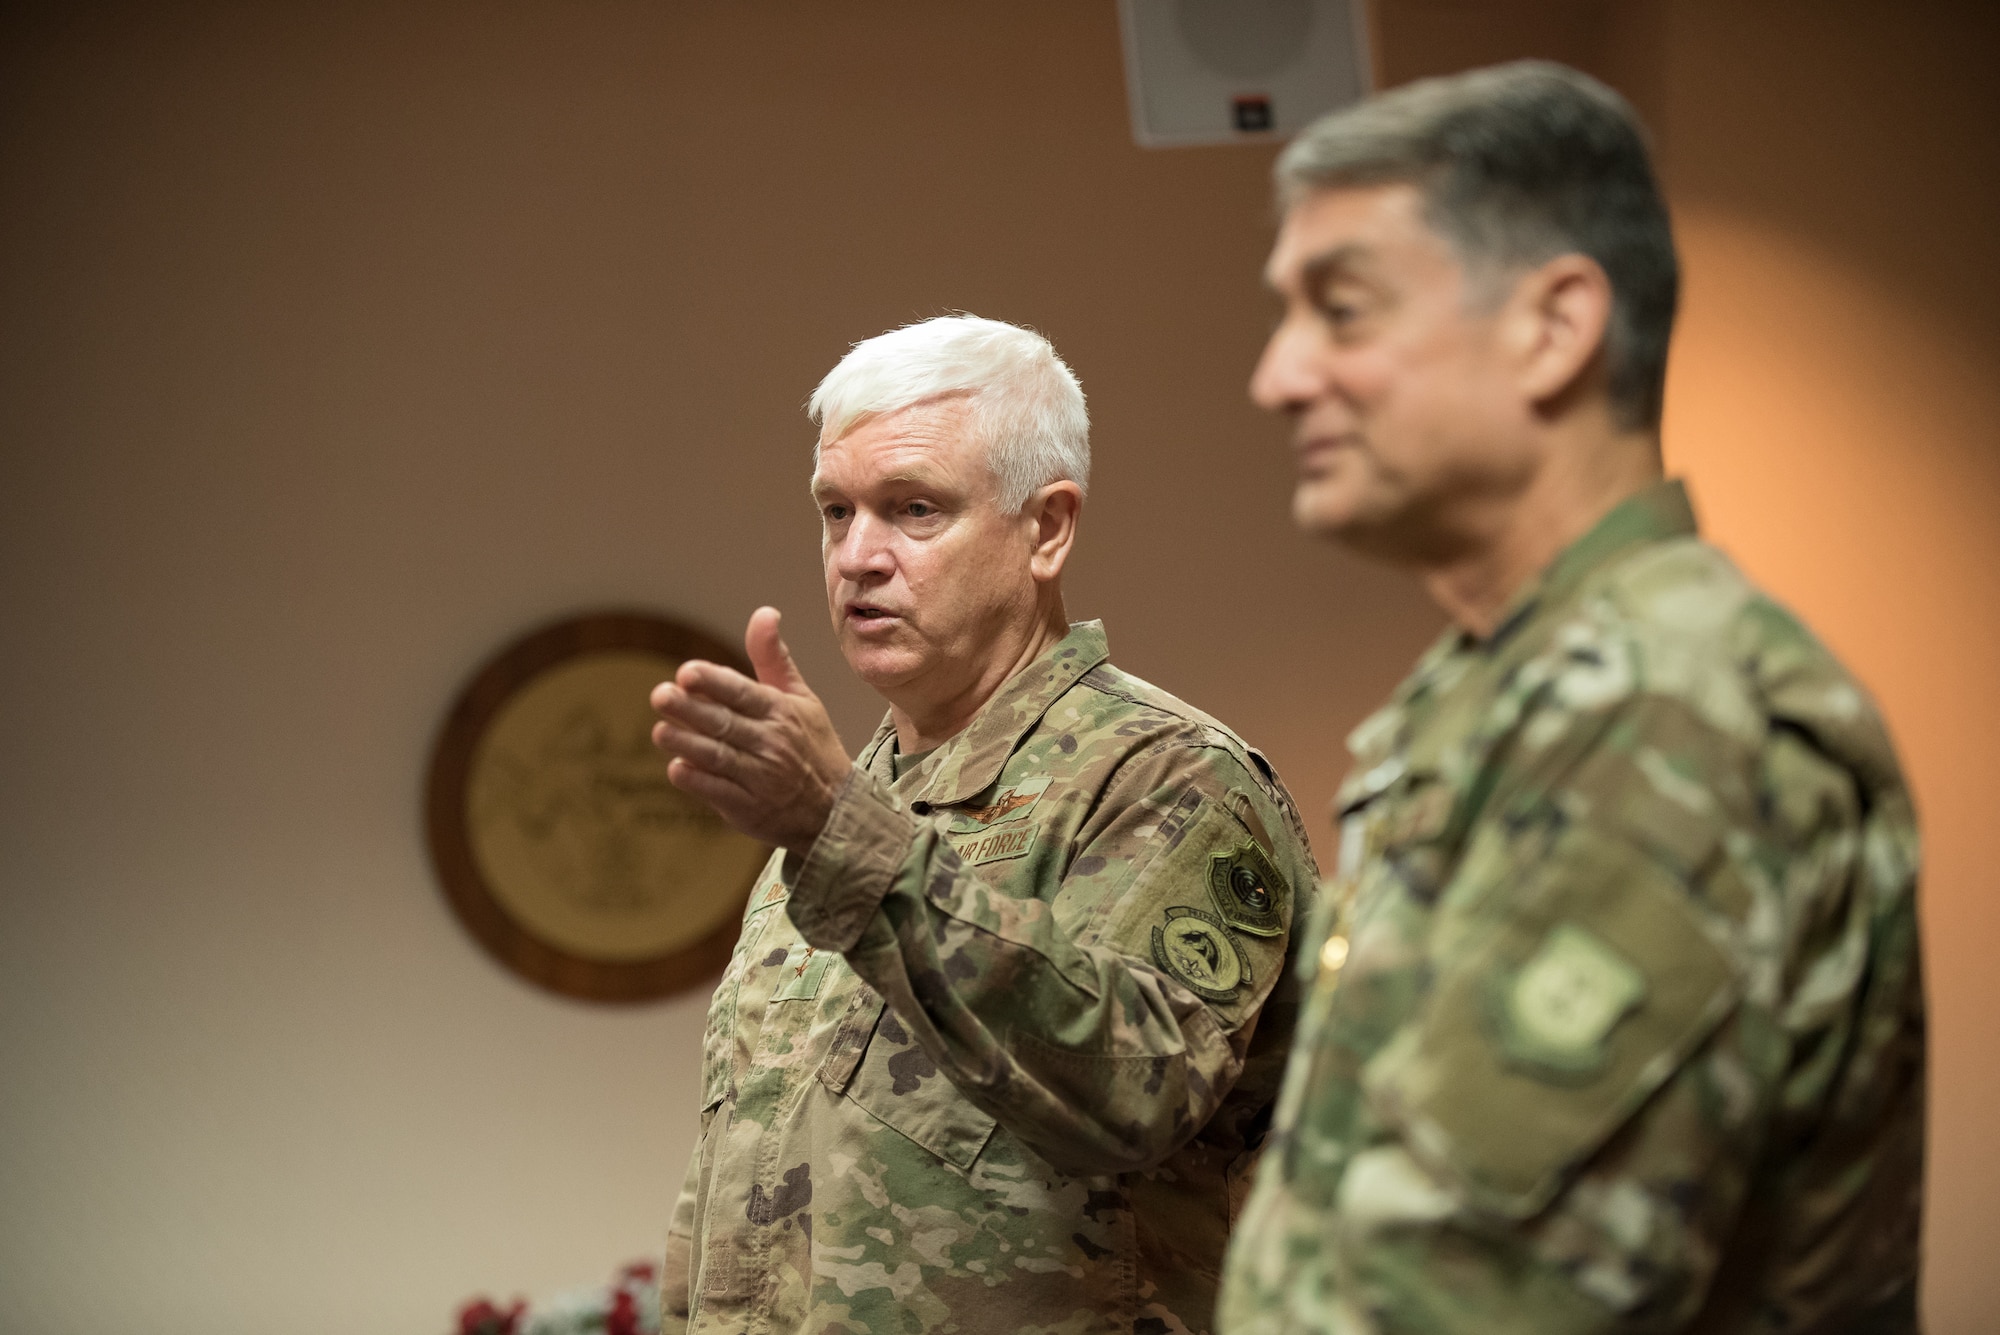 Lt. Gen. L. Scott Rice (left), director of the Air National Guard, discusses the career accomplishments of Brig. Gen. Warren Hurst, Kentucky’s assistant adjutant general for Air, during a ceremony at the Kentucky Air National Guard base in Louisville, Ky., Aug. 10, 2019. Rice presented Hurst with the Distinguished Service Medal, which recognizes exceptionally meritorious service in duties of great responsibility. (U.S. Air National Guard photo by Dale Greer)